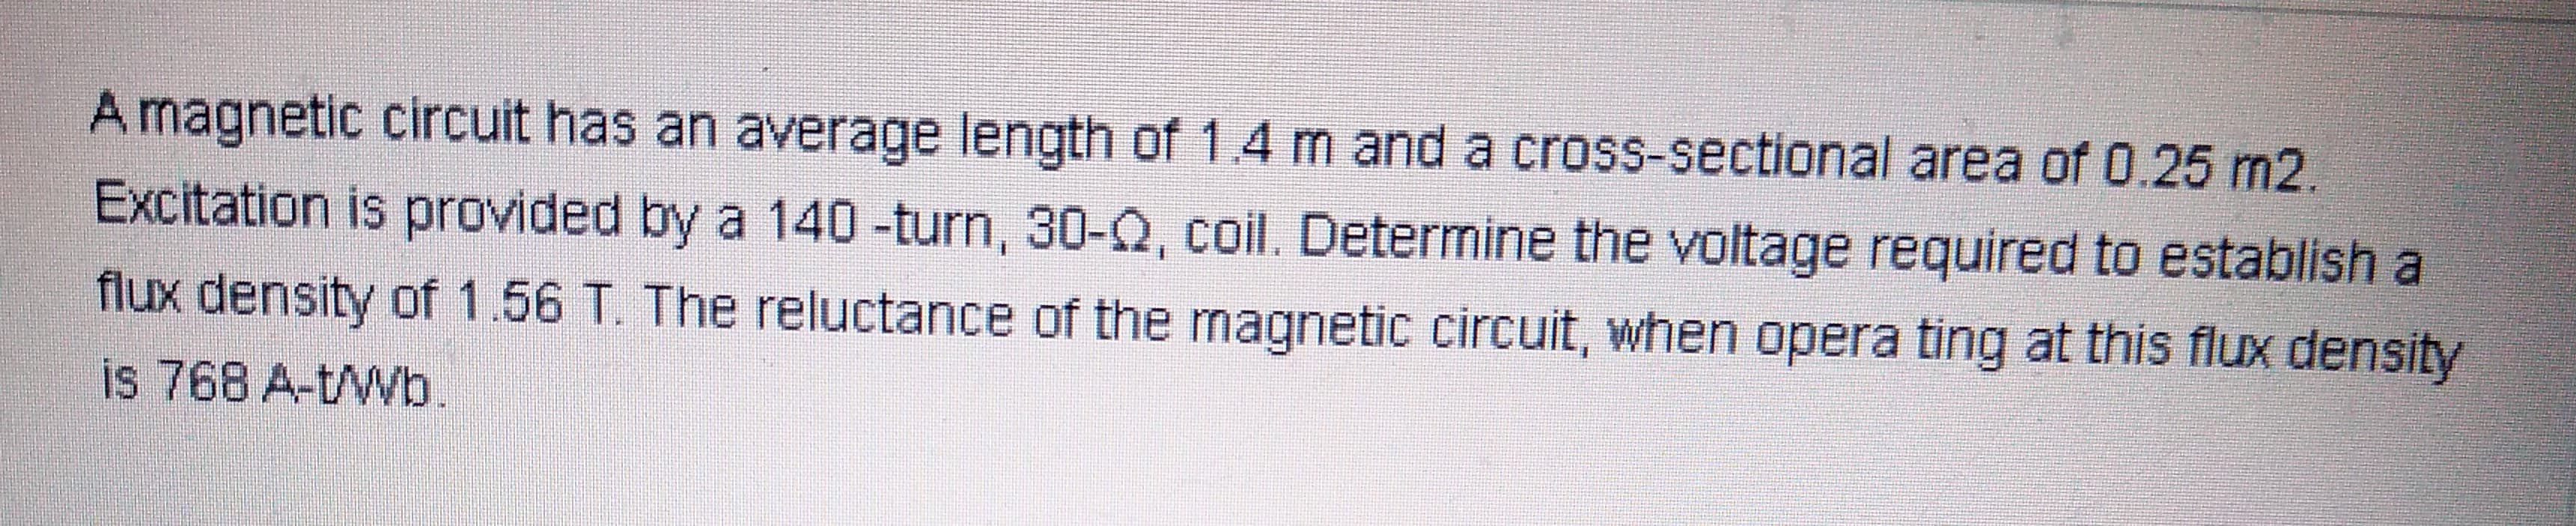 A magnetic circuit has an average length of 1.4 m and a cross-sectional area of 0.25 m2.
Excitation is provided by a 140-turn, 30-Q, coil. Determine the voltage required to establish a
flux density of 1.56 T. The reluctance of the magnetic circuit, when opera ting at this flux density
is 768 A-tWb.
